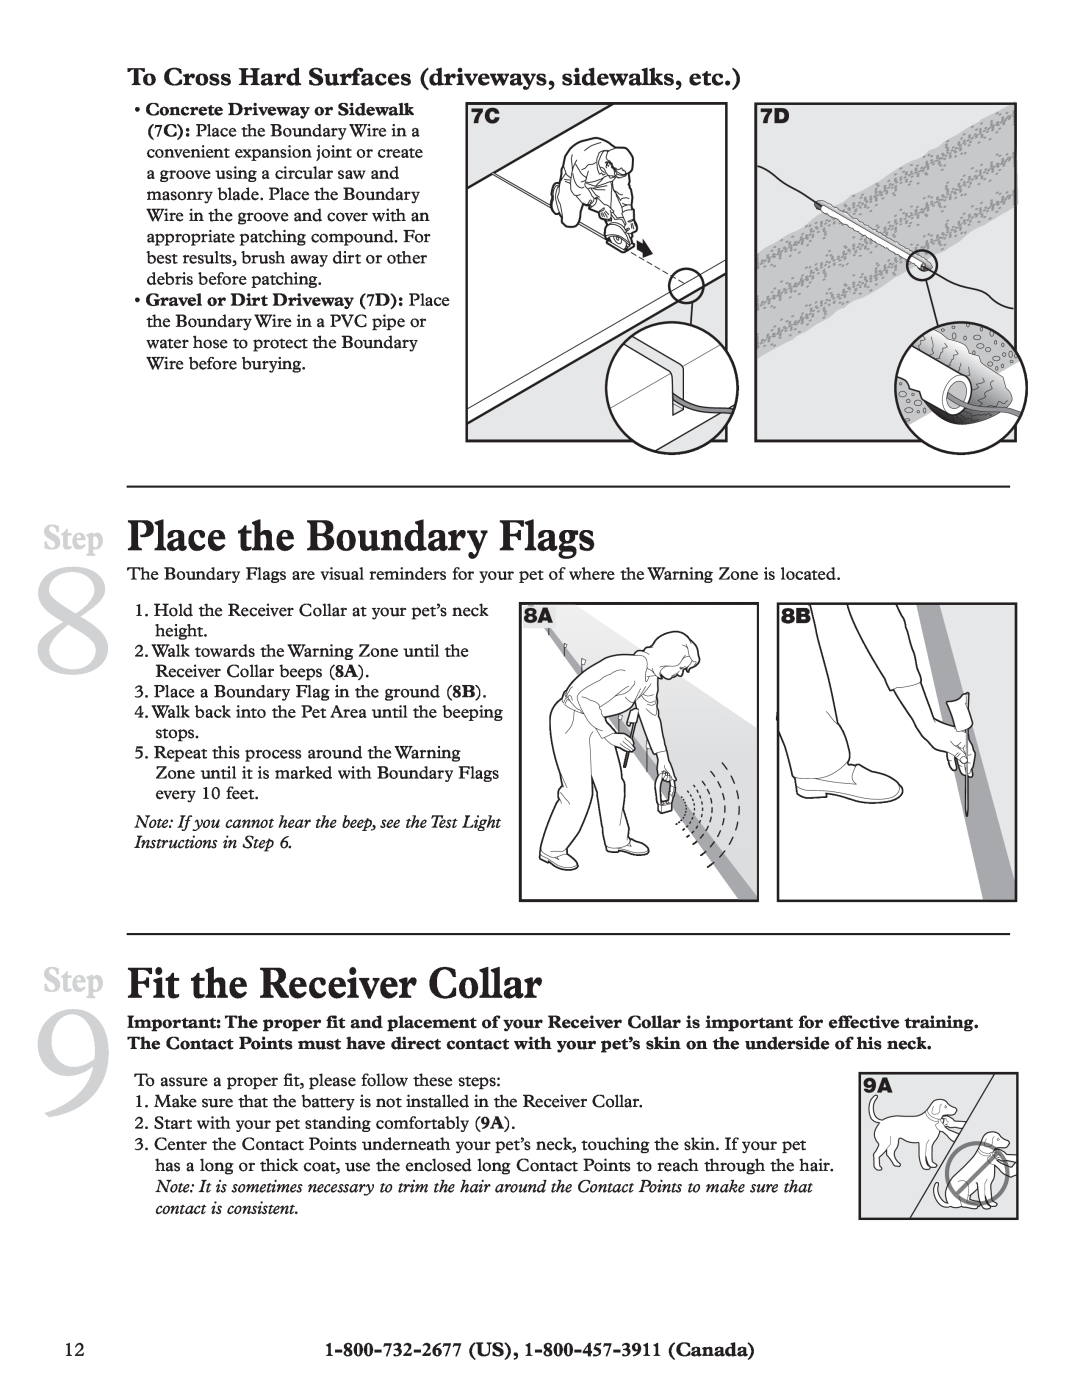 Petsafe RFA-200 Place the Boundary Flags, Fit the Receiver Collar, To Cross Hard Surfaces driveways, sidewalks, etc, Step 